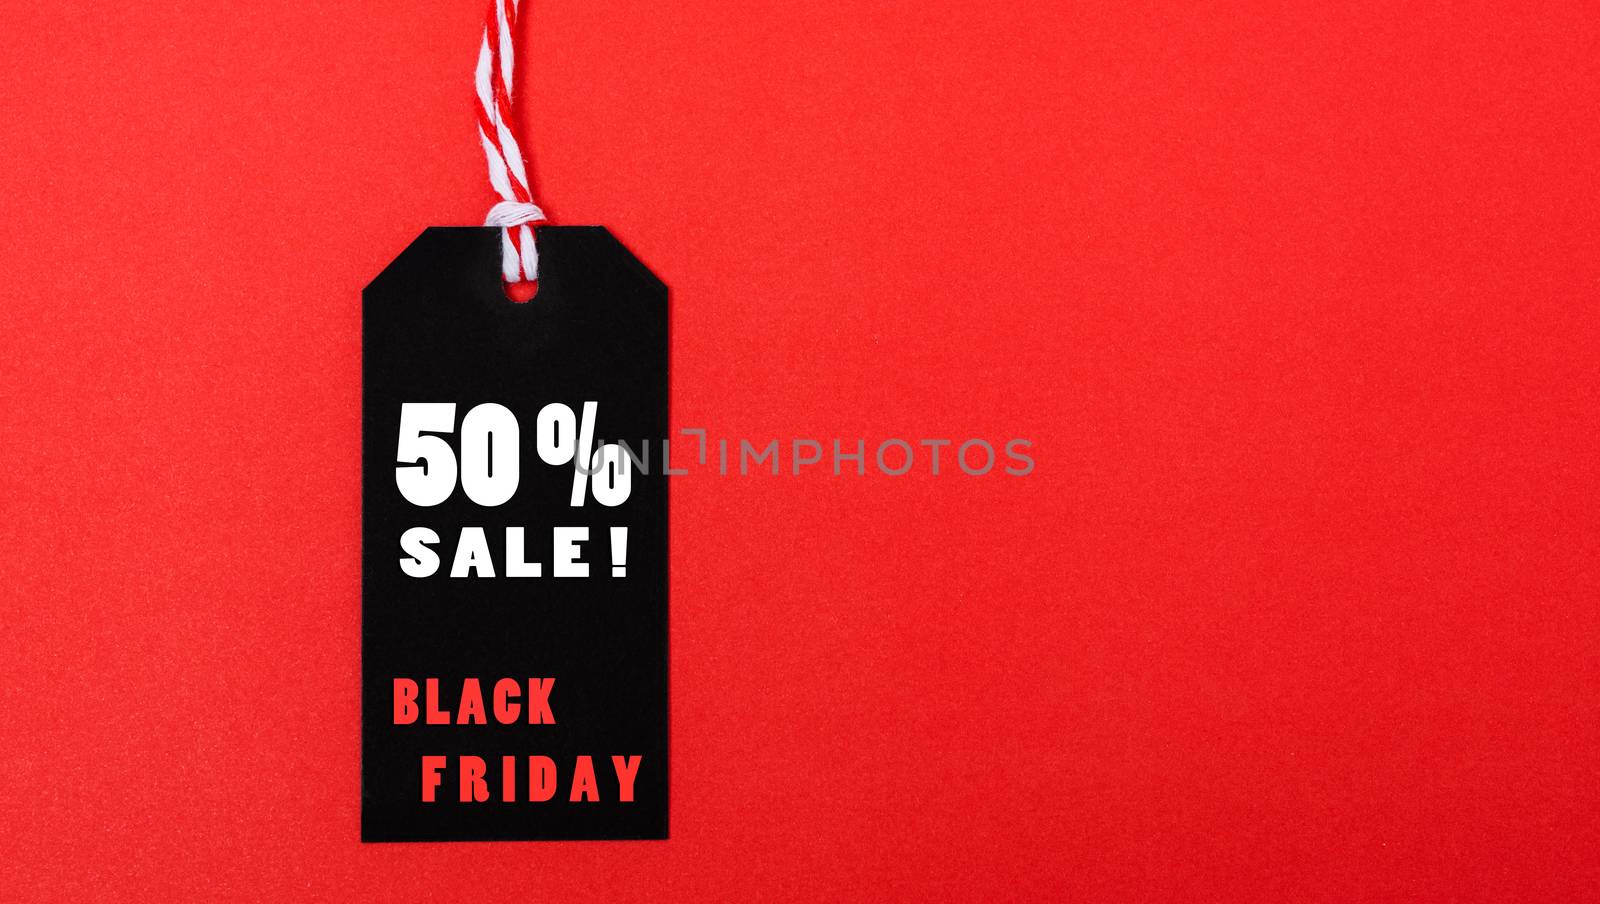 Online shopping, Promotion Black Friday Sale text by Sorapop